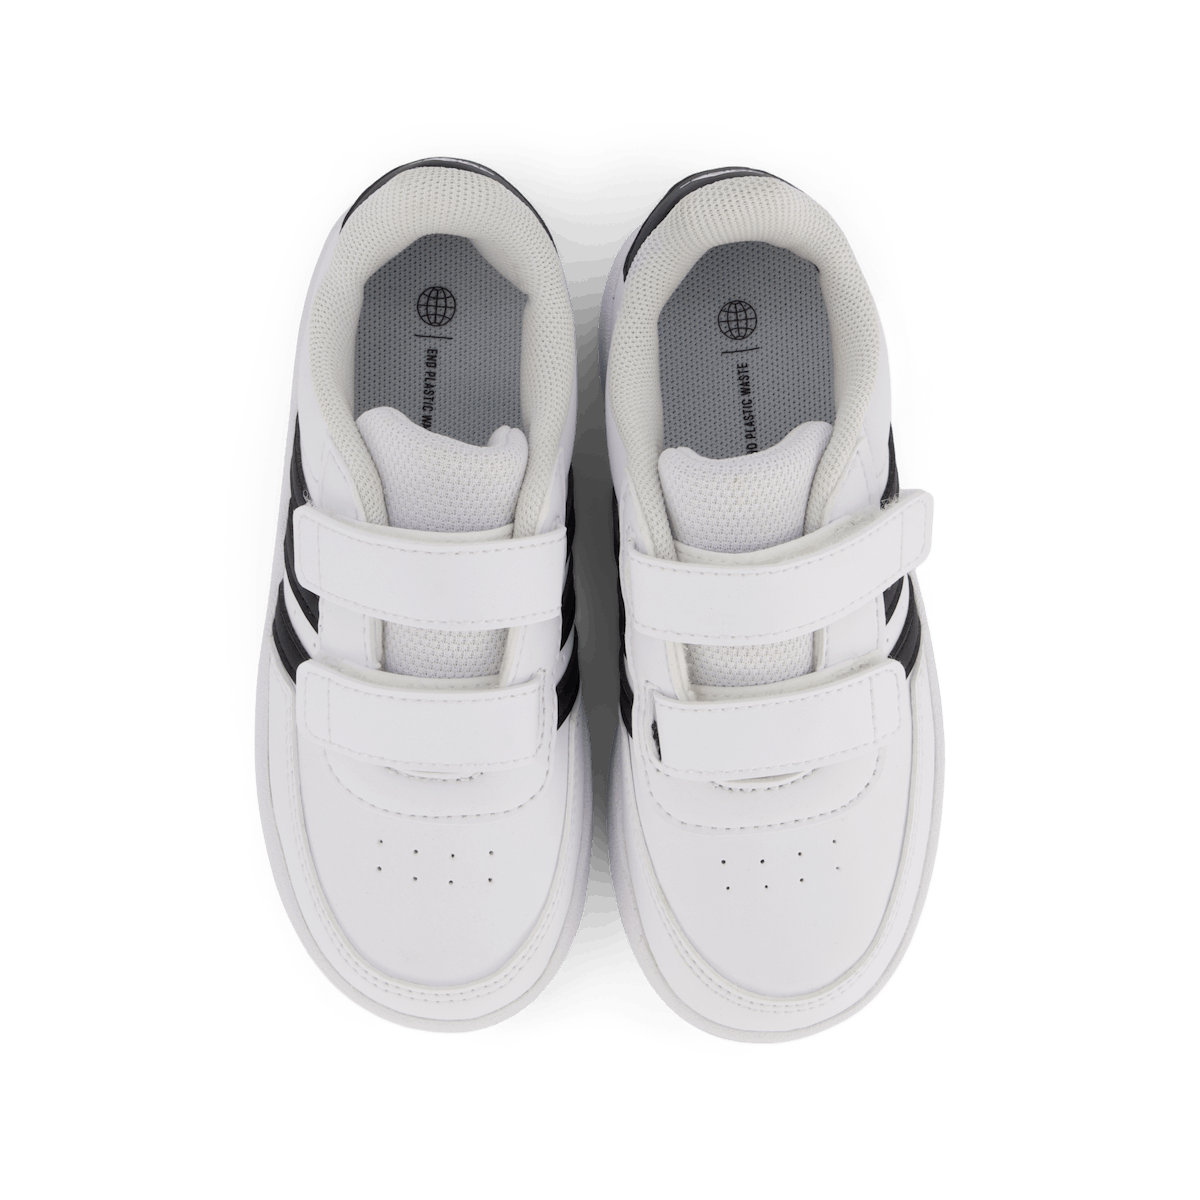 Breaknet Lifestyle Court Two-Strap Hook-and-Loop Shoes Cloud White / Core Black / Core Black